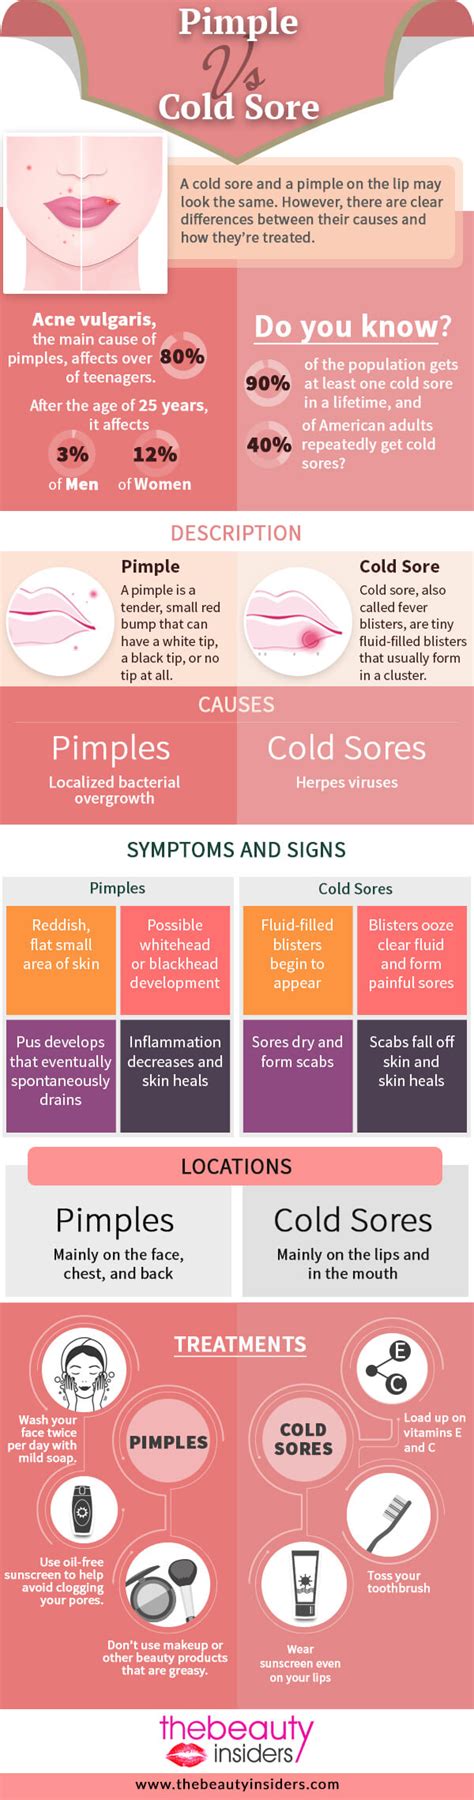 Pimple Vs Cold Sore Learn The Differences Similarities Hot Sex Picture